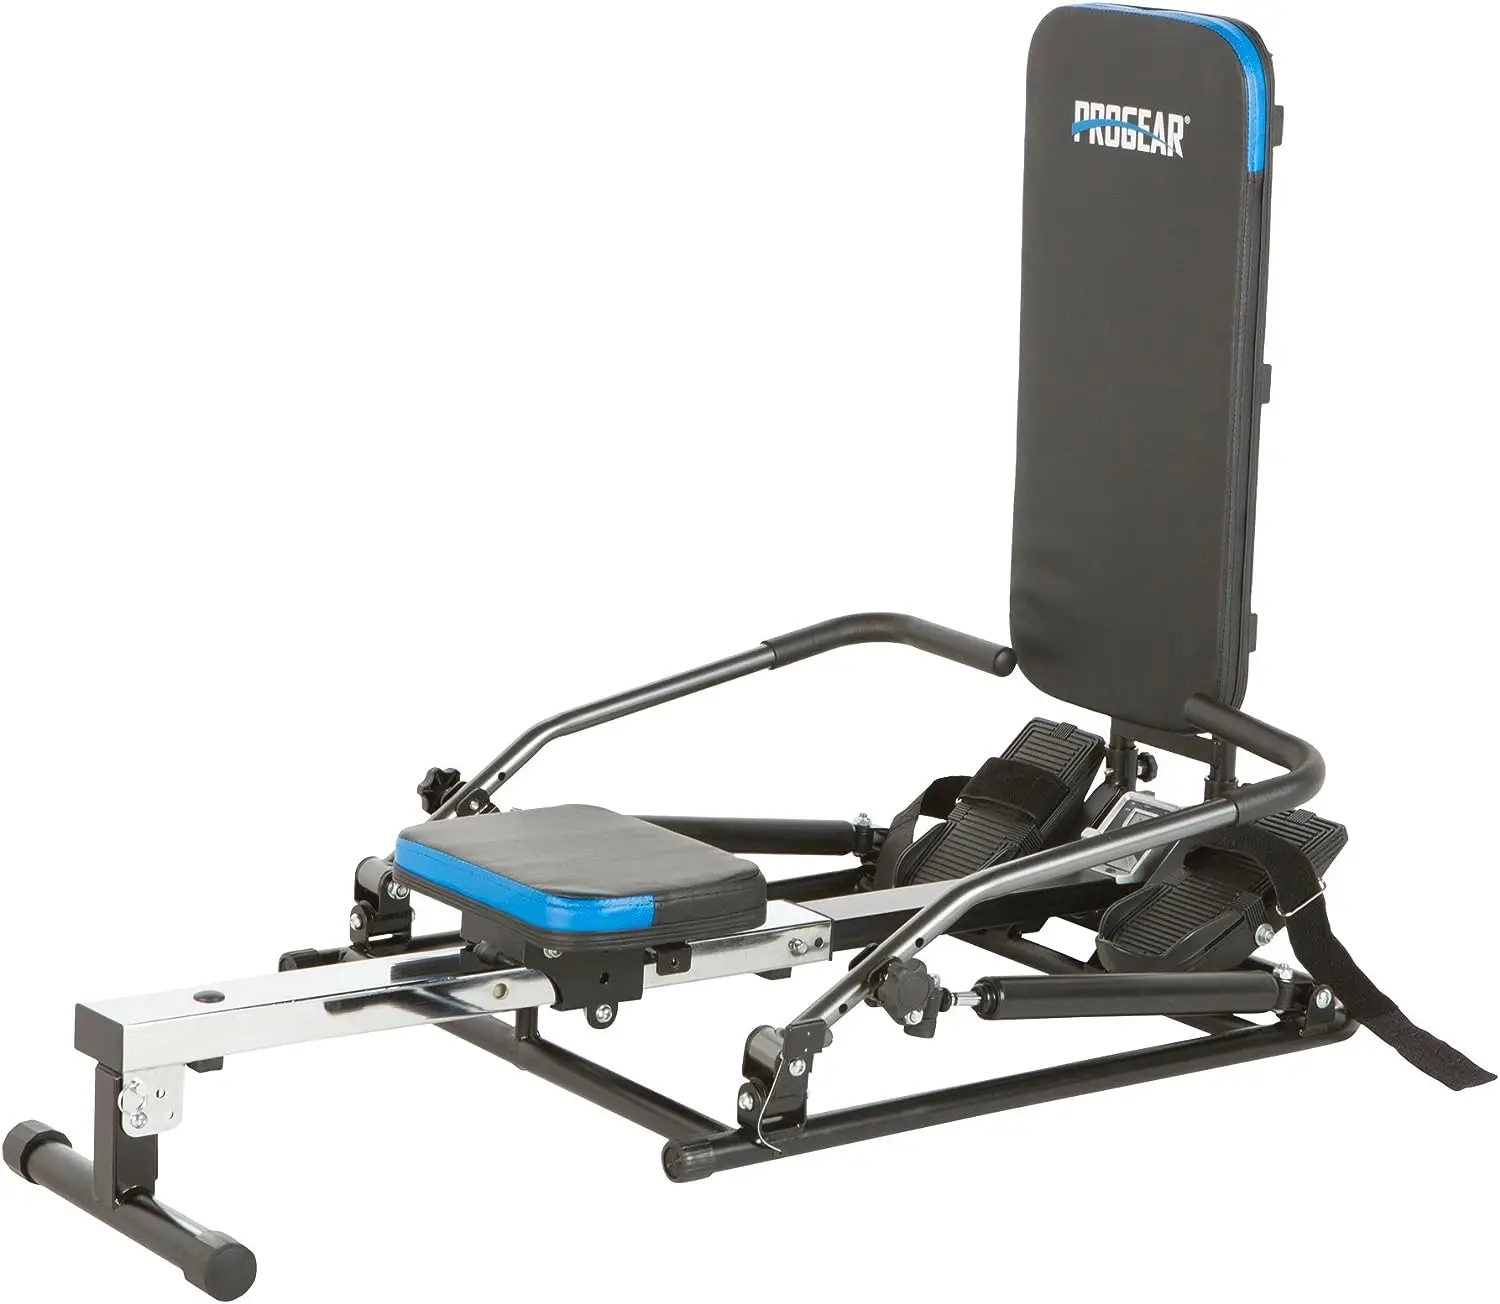 

Rower with Additional Multi Exercise Workout Capability, Black